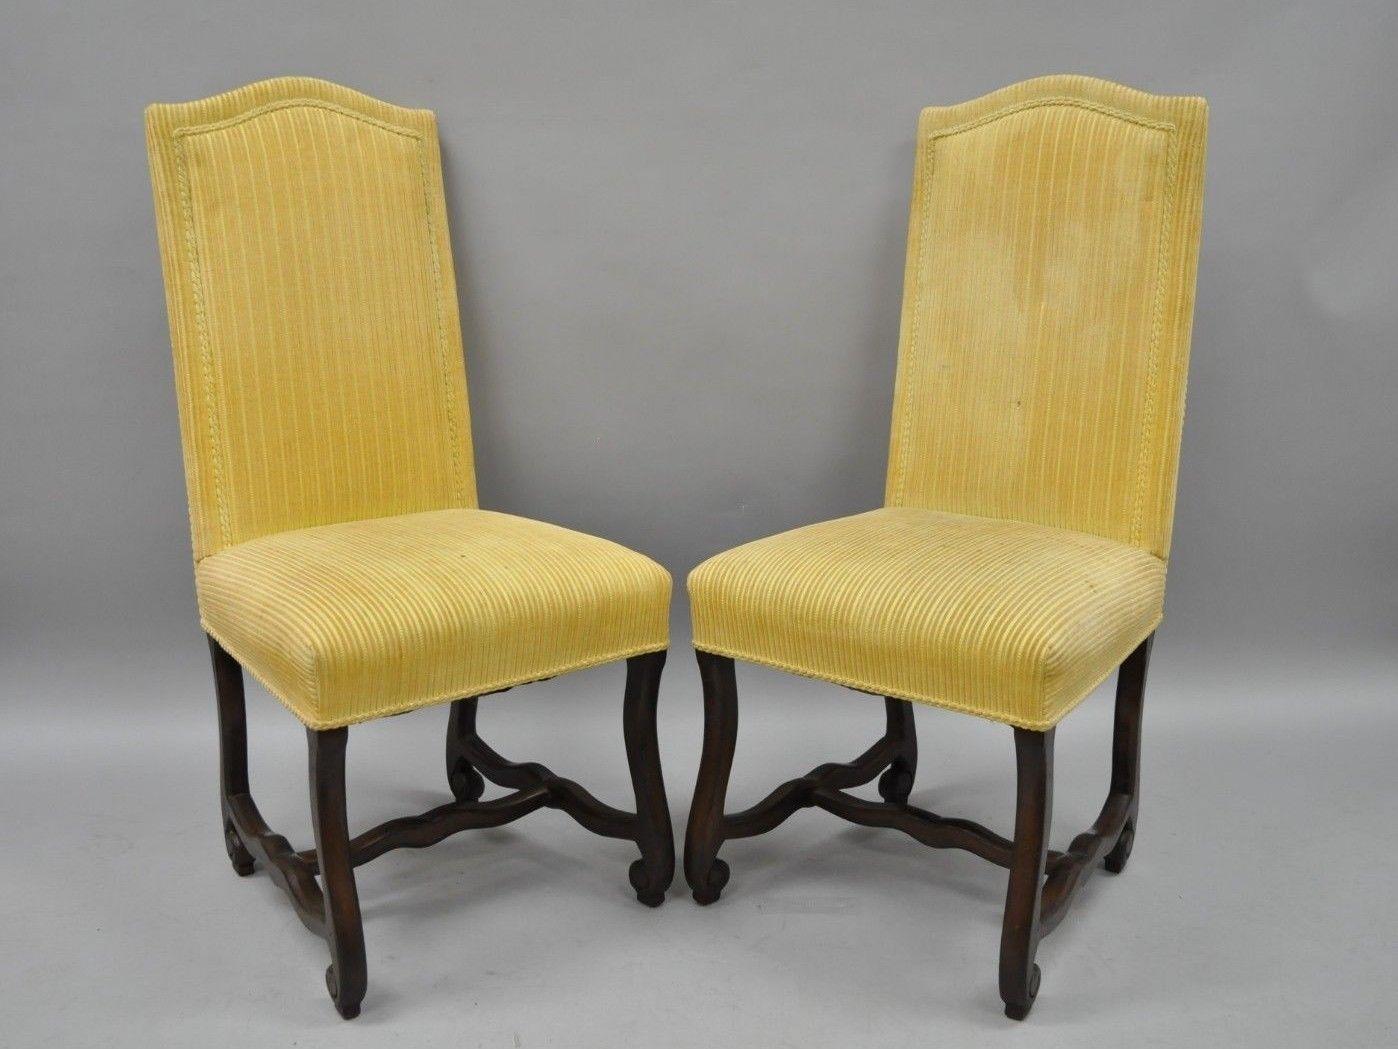 Set of ten vintage walnut Os De Mouton Louis XIV French style upholstered dining side chairs. Listing includes 10 armless chairs, solid carved wood frames, distressed finish, scrolling legs and stretcher support, fully upholstered seats and backs,